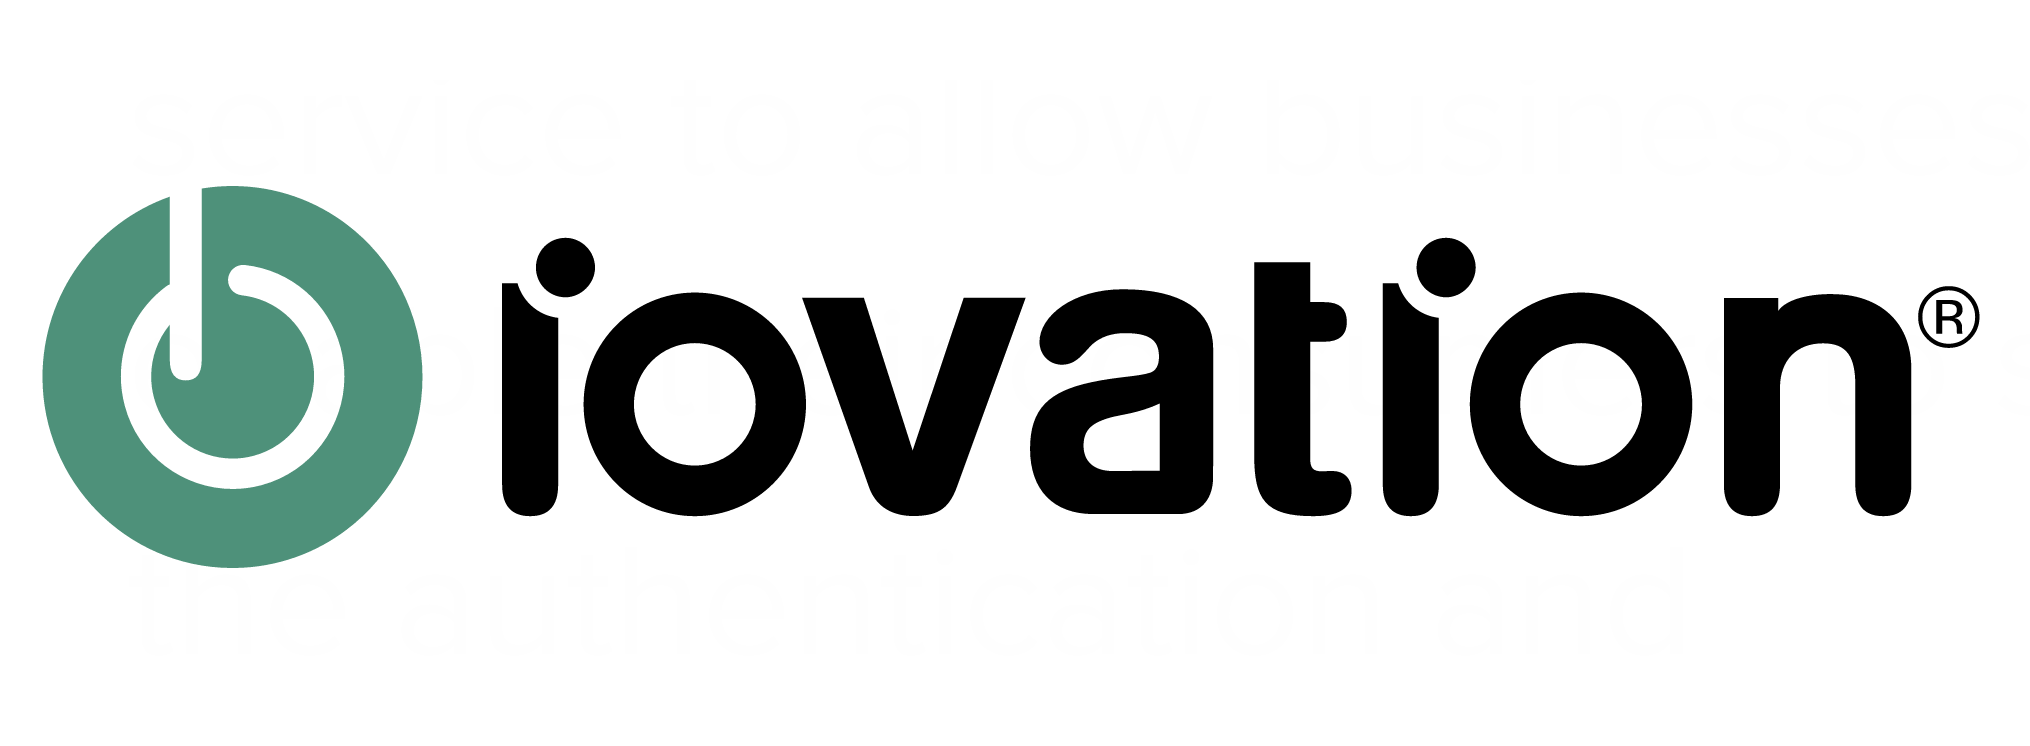 Iovation Acquires LaunchKey, Plans to Continue Supporting WordPress Plugin